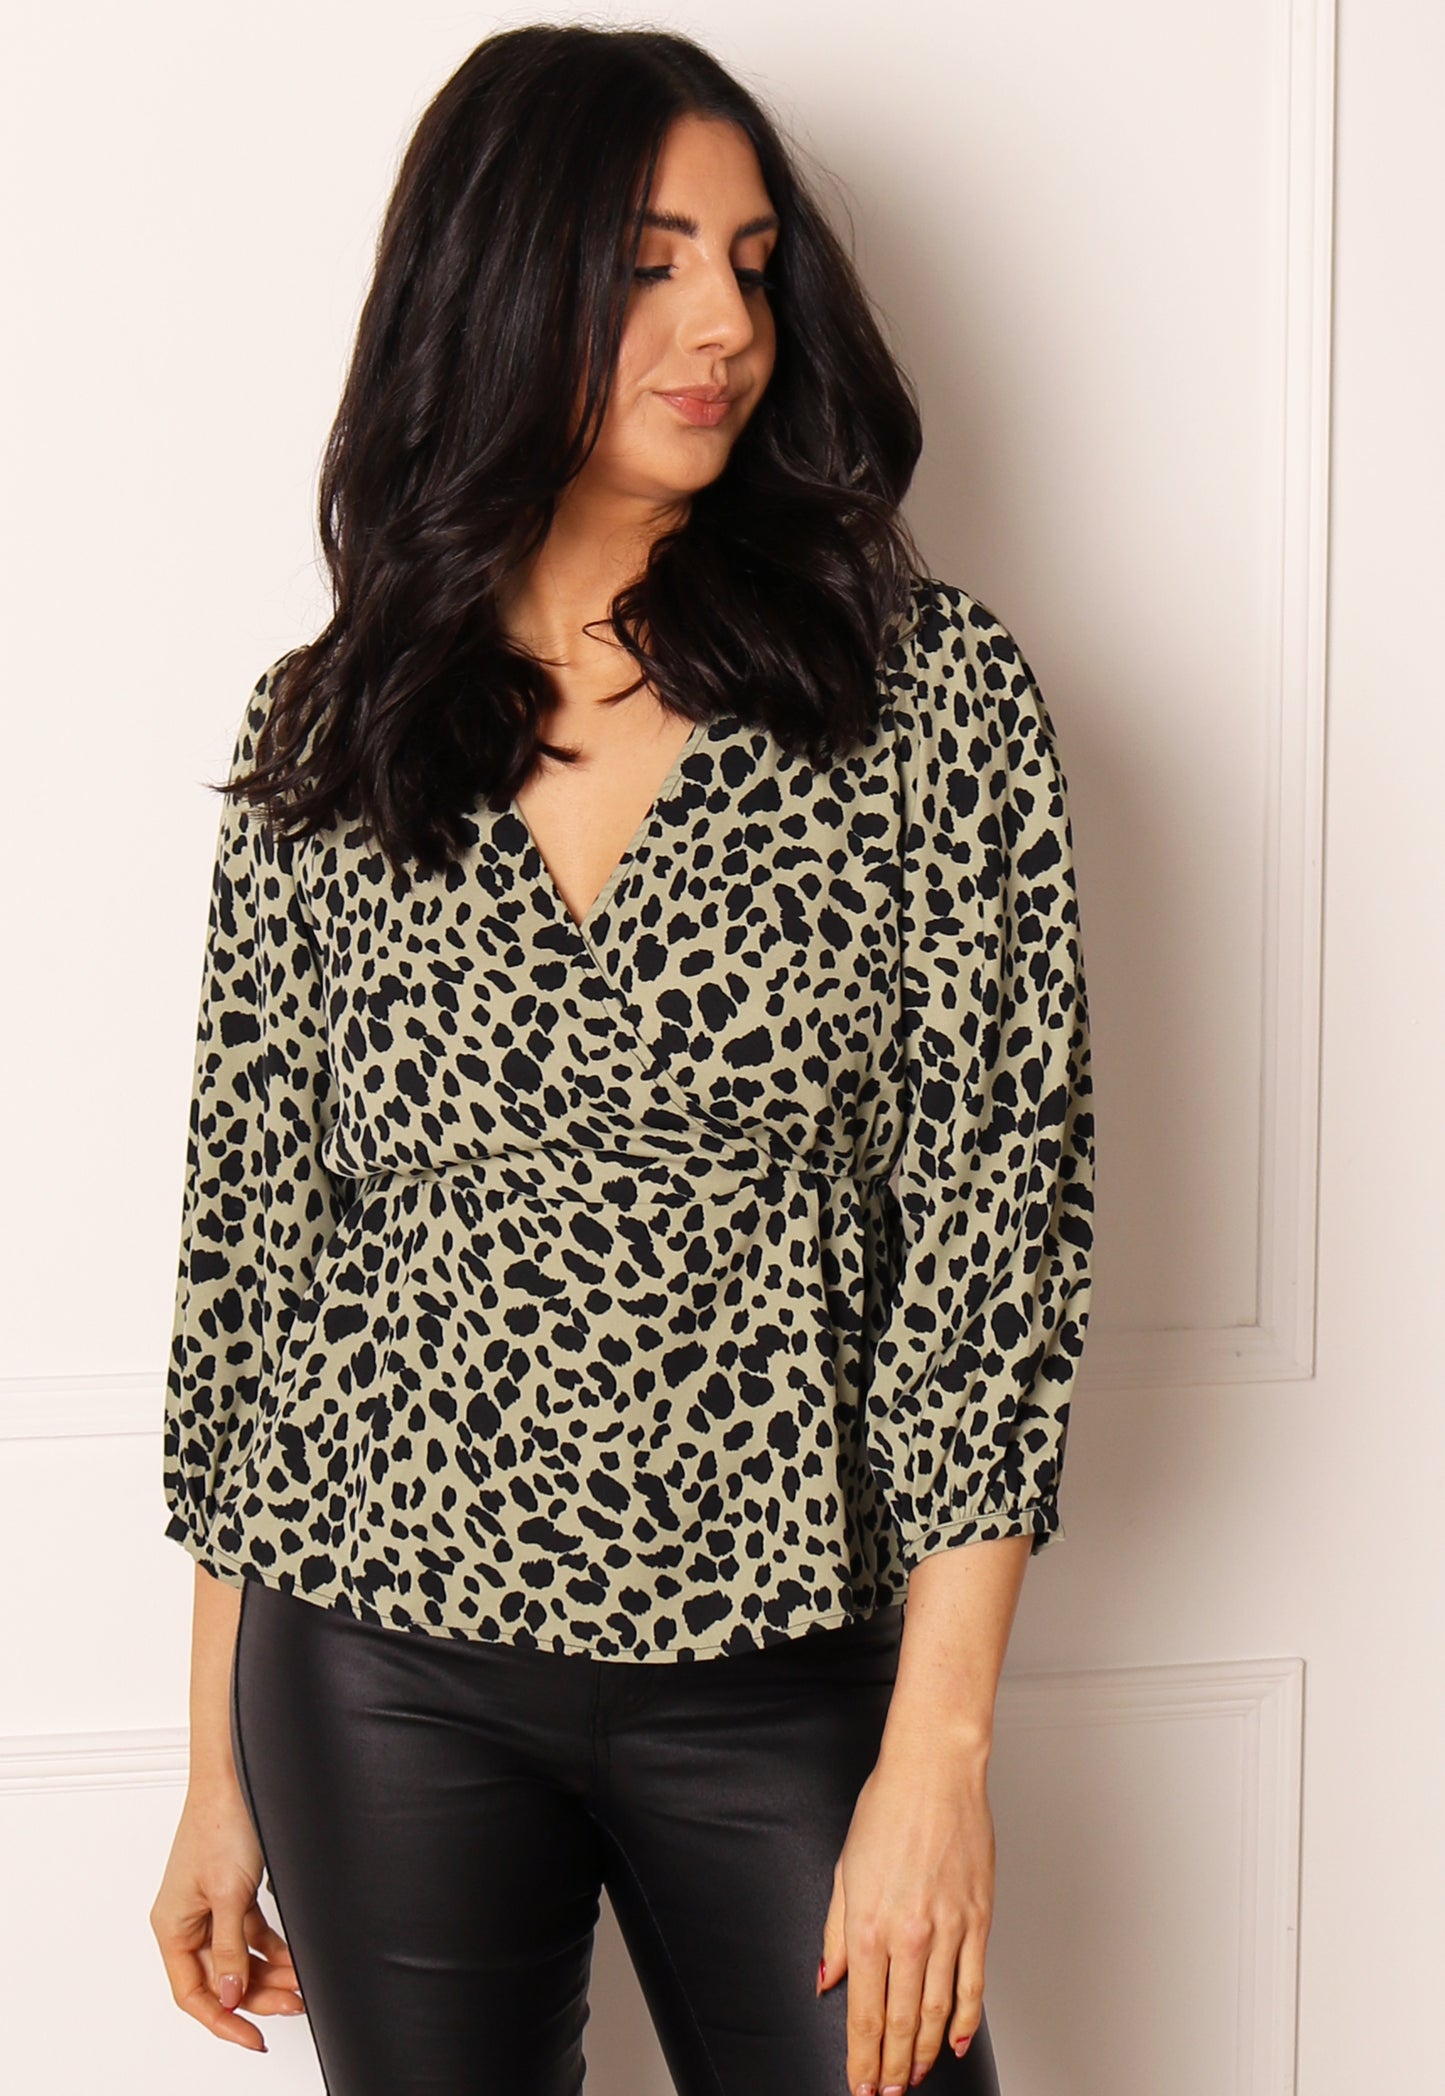 ONLY Sumi Leopard Print Wrap Top with Three Quarter Sleeves in Green & Black - concretebartops